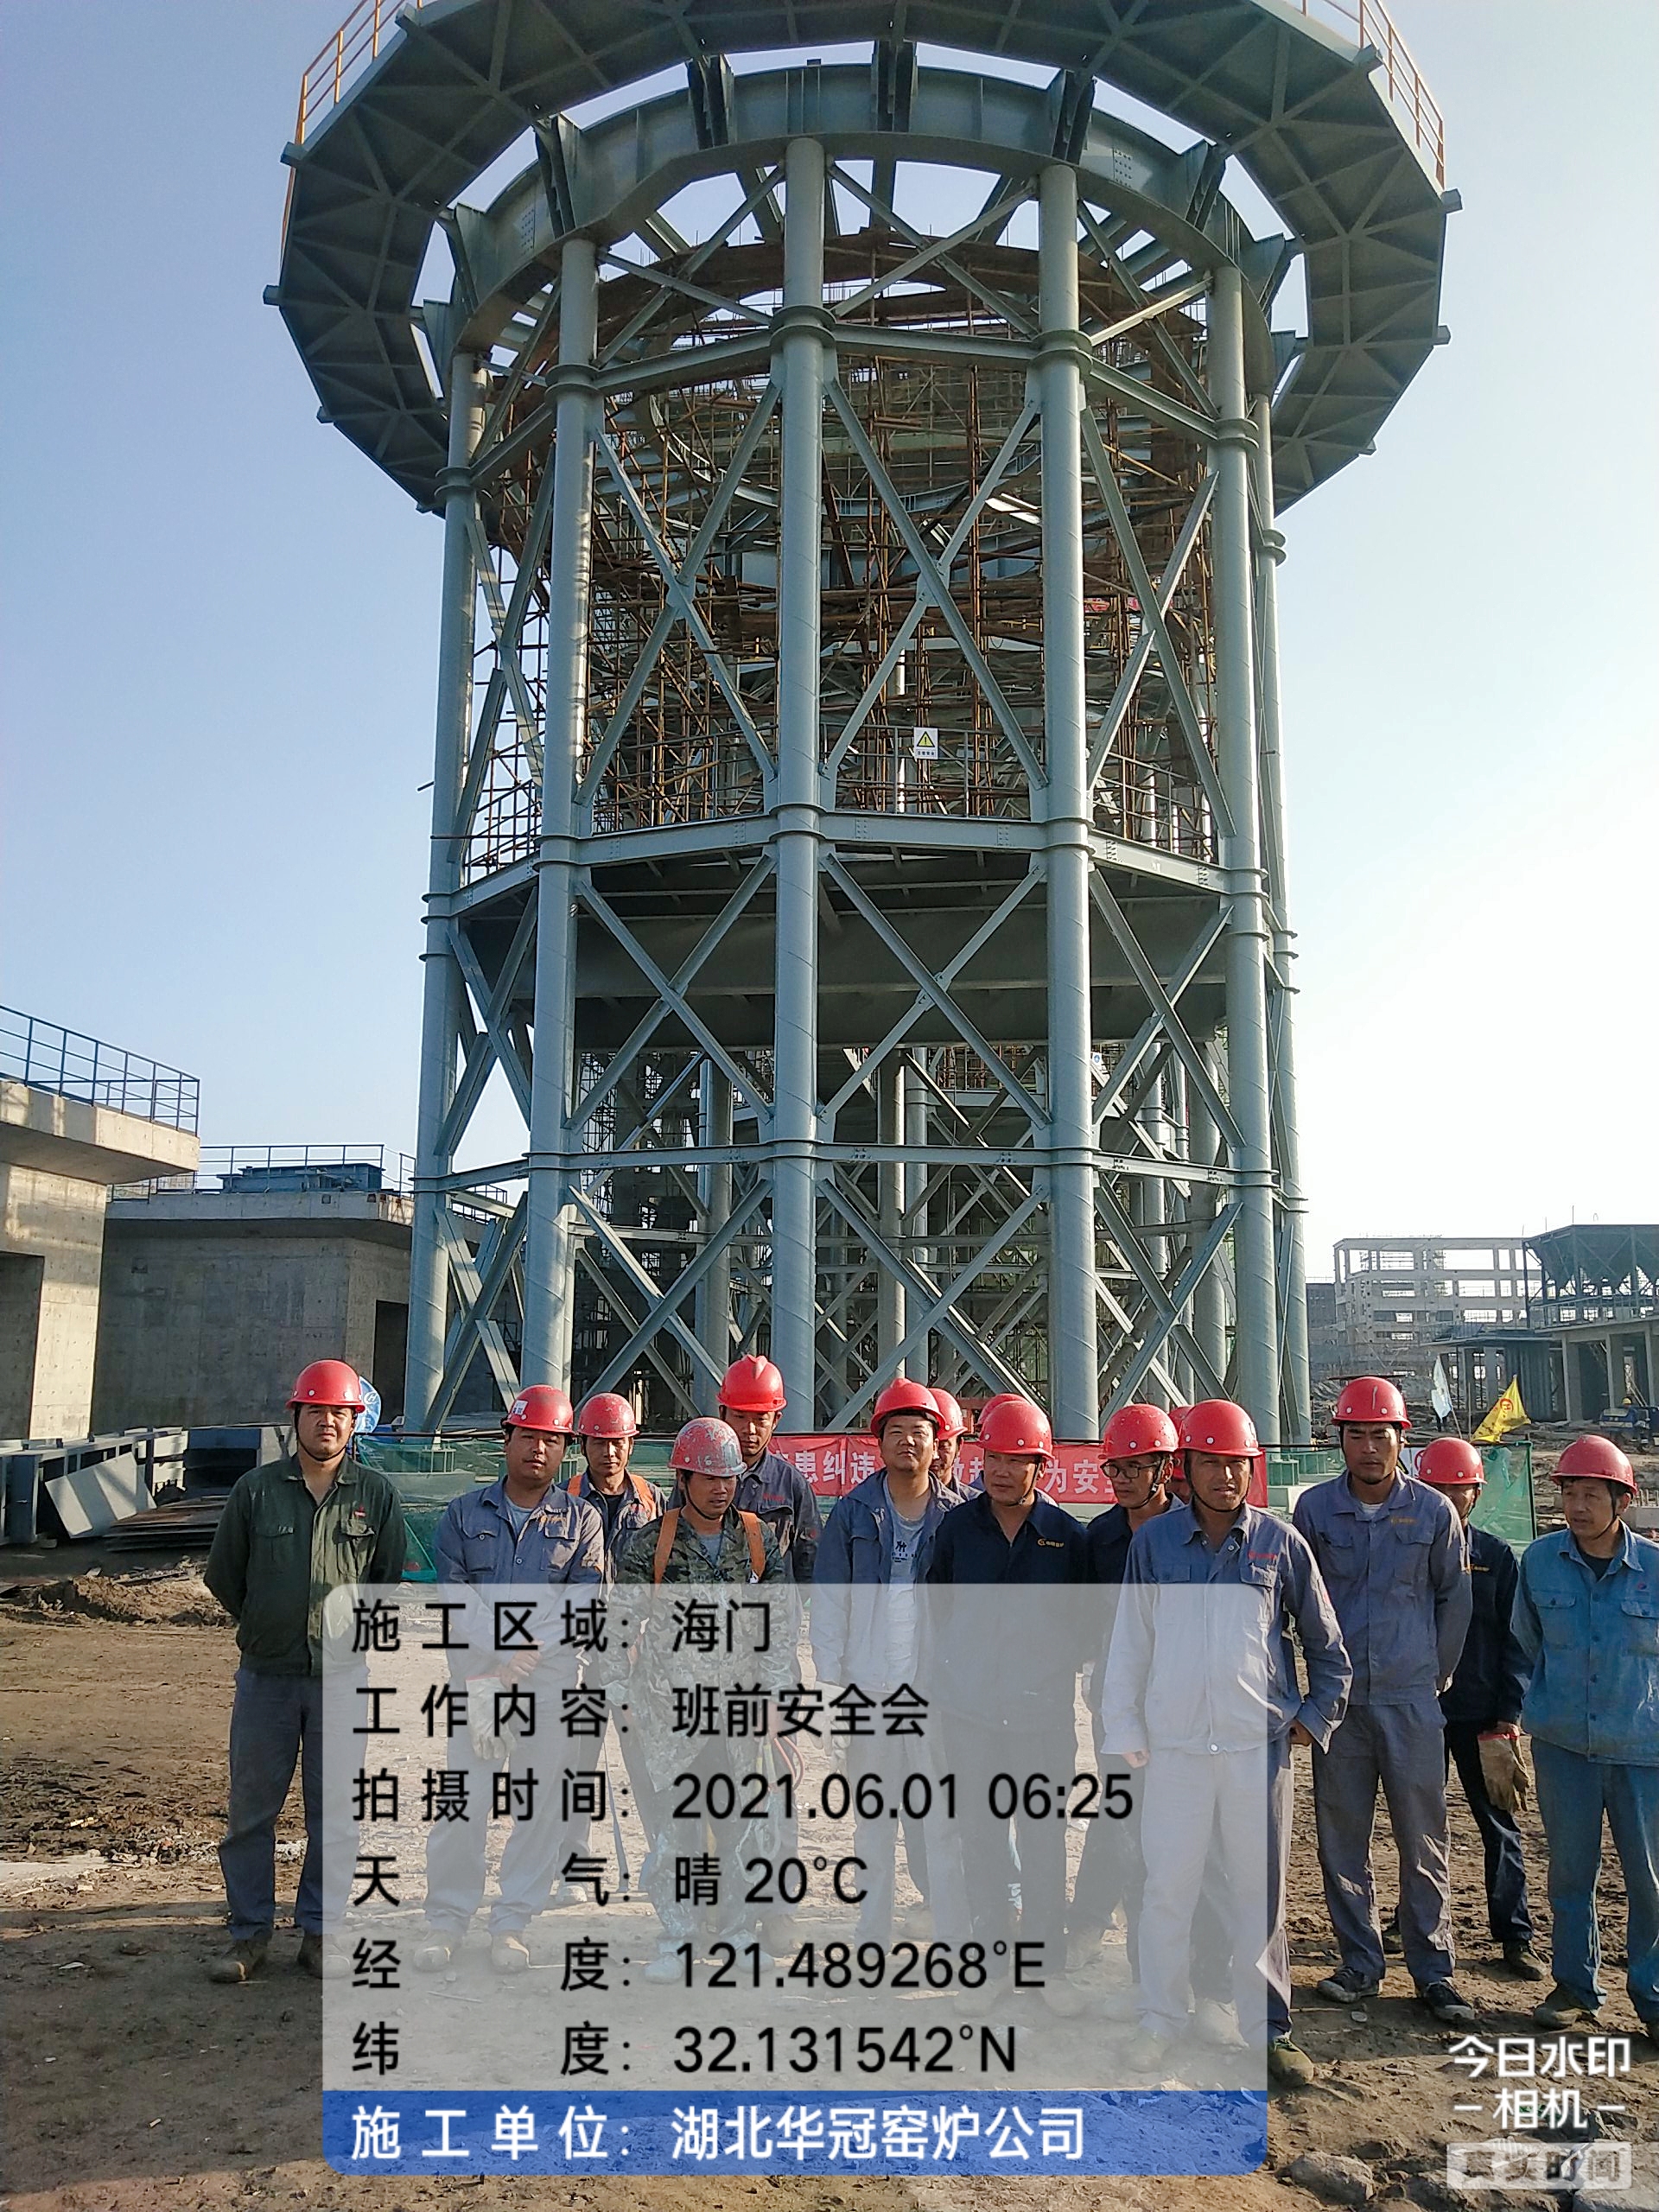 Construction site of Zhongtian Steel's rotary kiln project